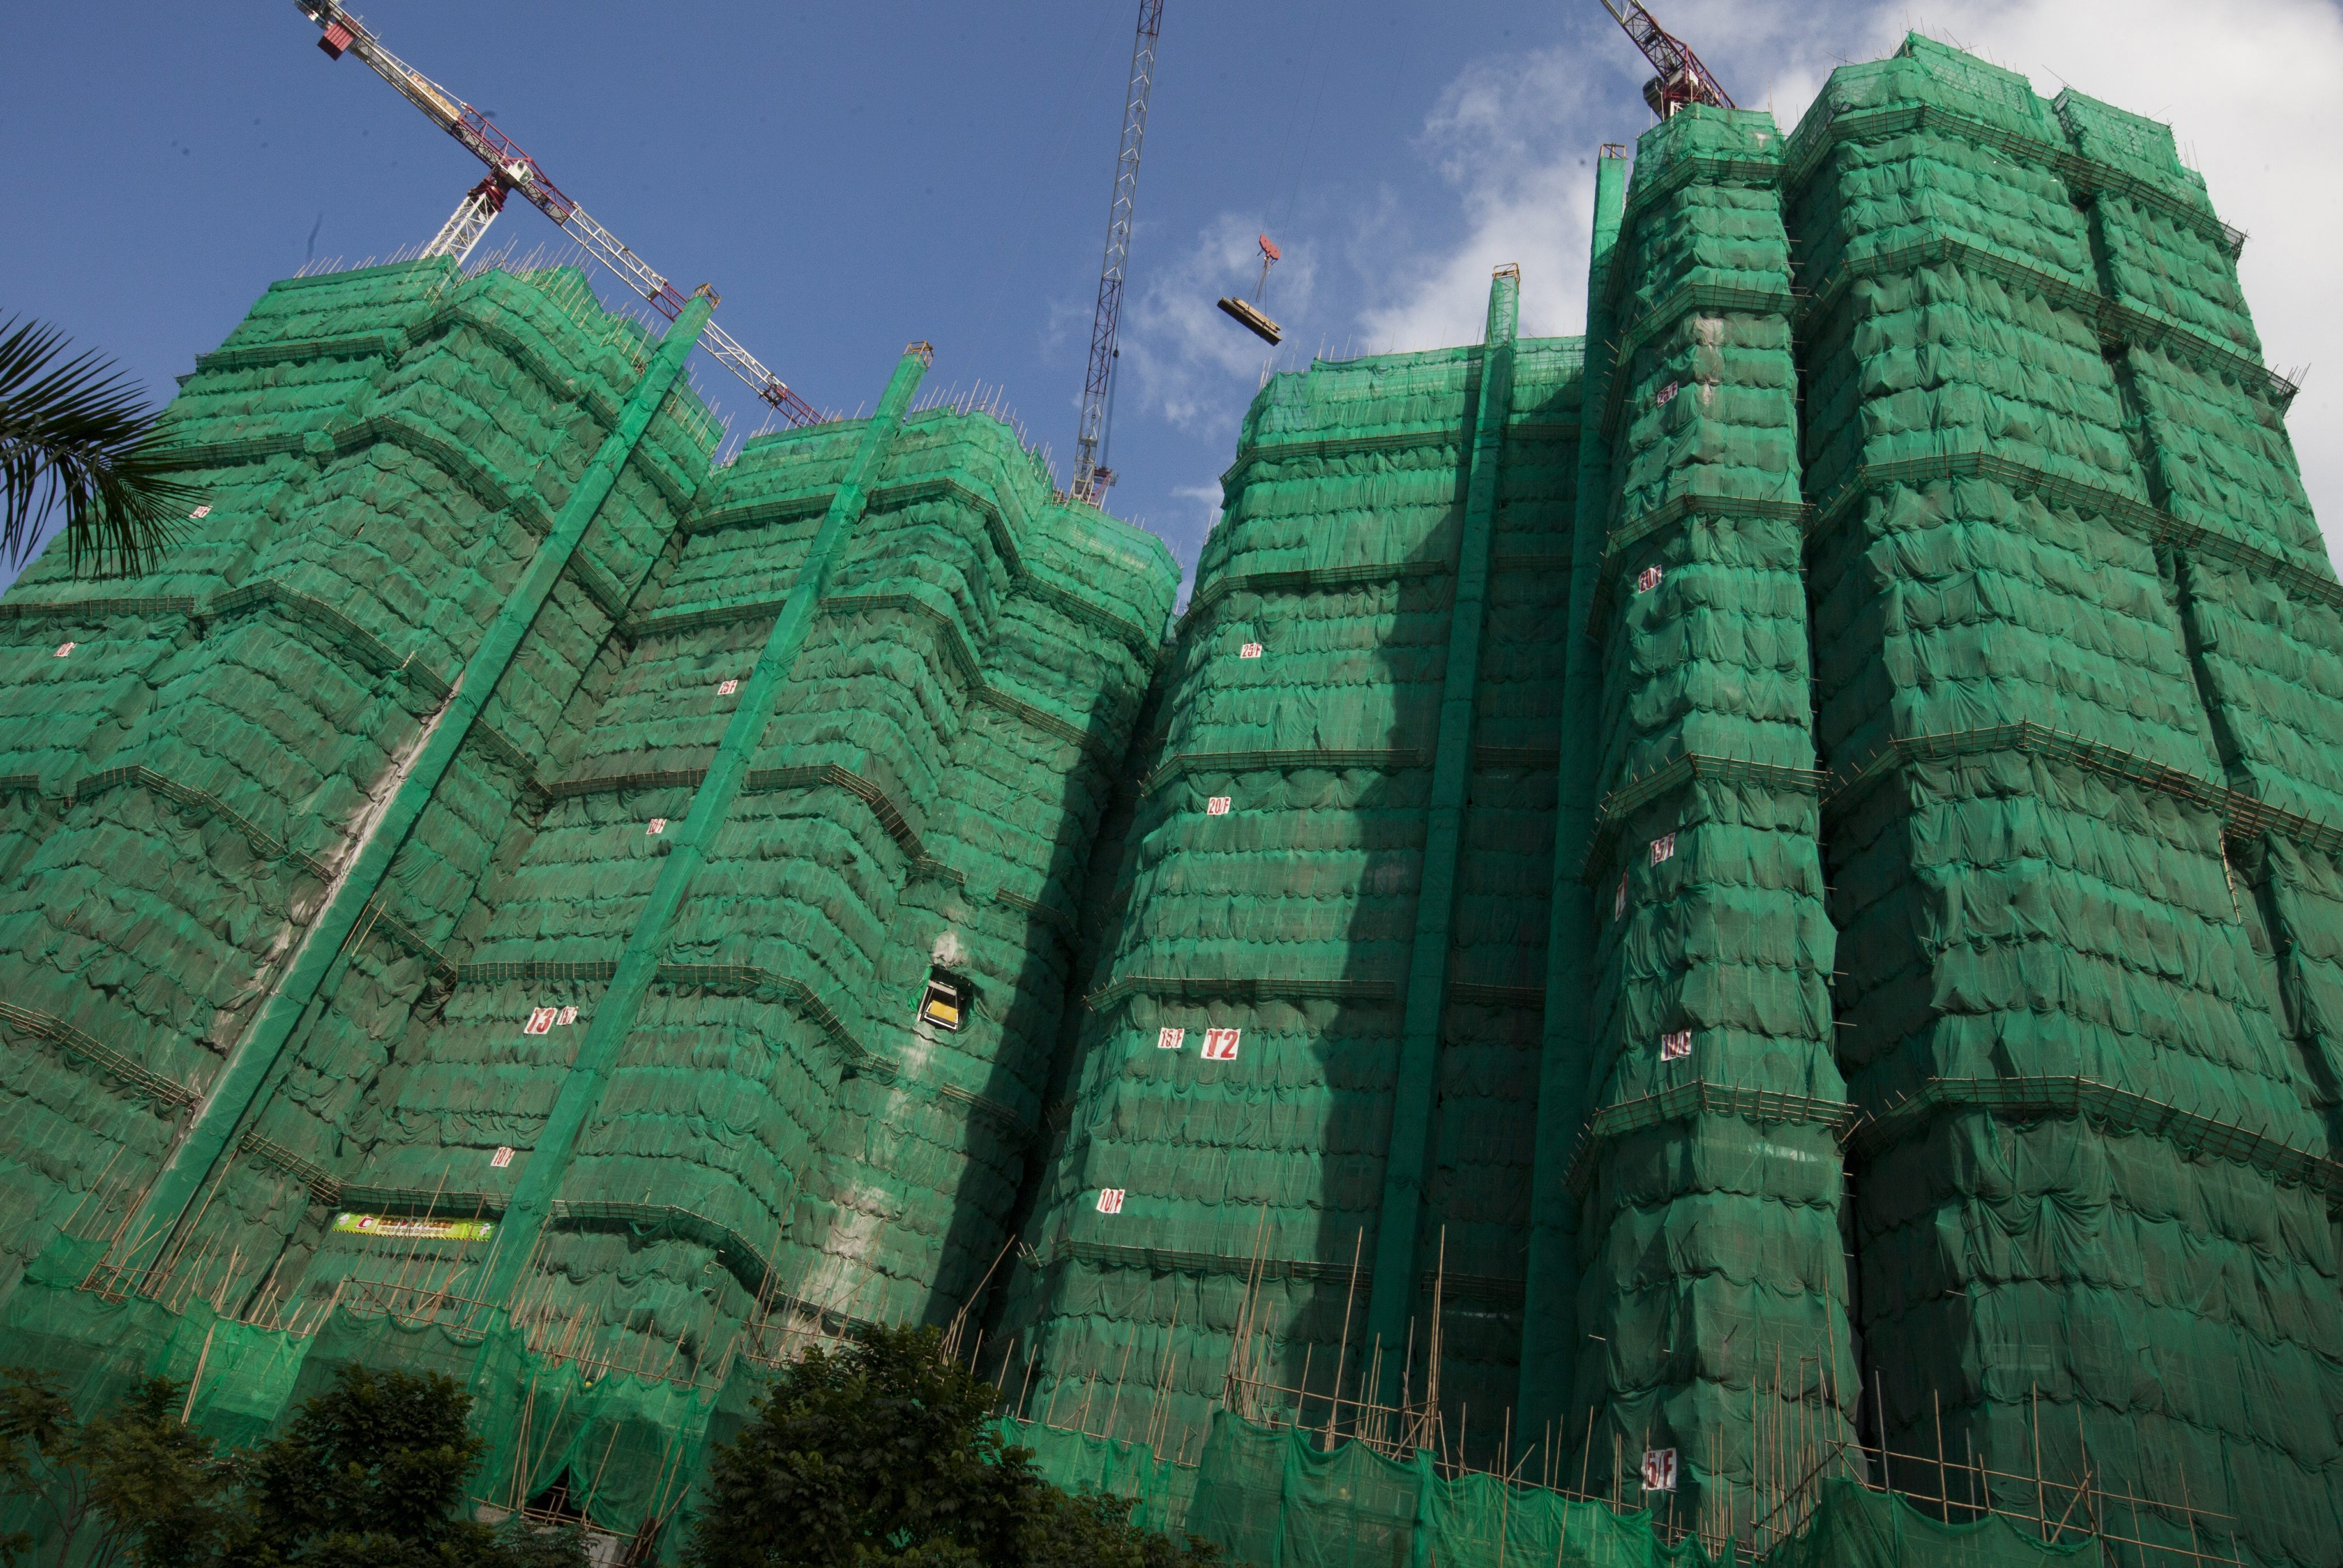 epa05004369 Mass residential housing under construction in Tseung Kwan O, Kowloon, Hong Kong, 31 October 2015. Property analysts are forecasting a drop in home prices in Hong Kong, as a report released by investment bank UBS showed Hong Kong in second place to London as the city most at risk of a proerty bubble. According to data released by the Hong Kong Monetary Authority, new mortgage loans totalled 20.3 billion Hong Kong dollars (Euro 2.4 billion) in September, a drop of 13.4 per cent compared with August. EPA/ALEX HOFFORD